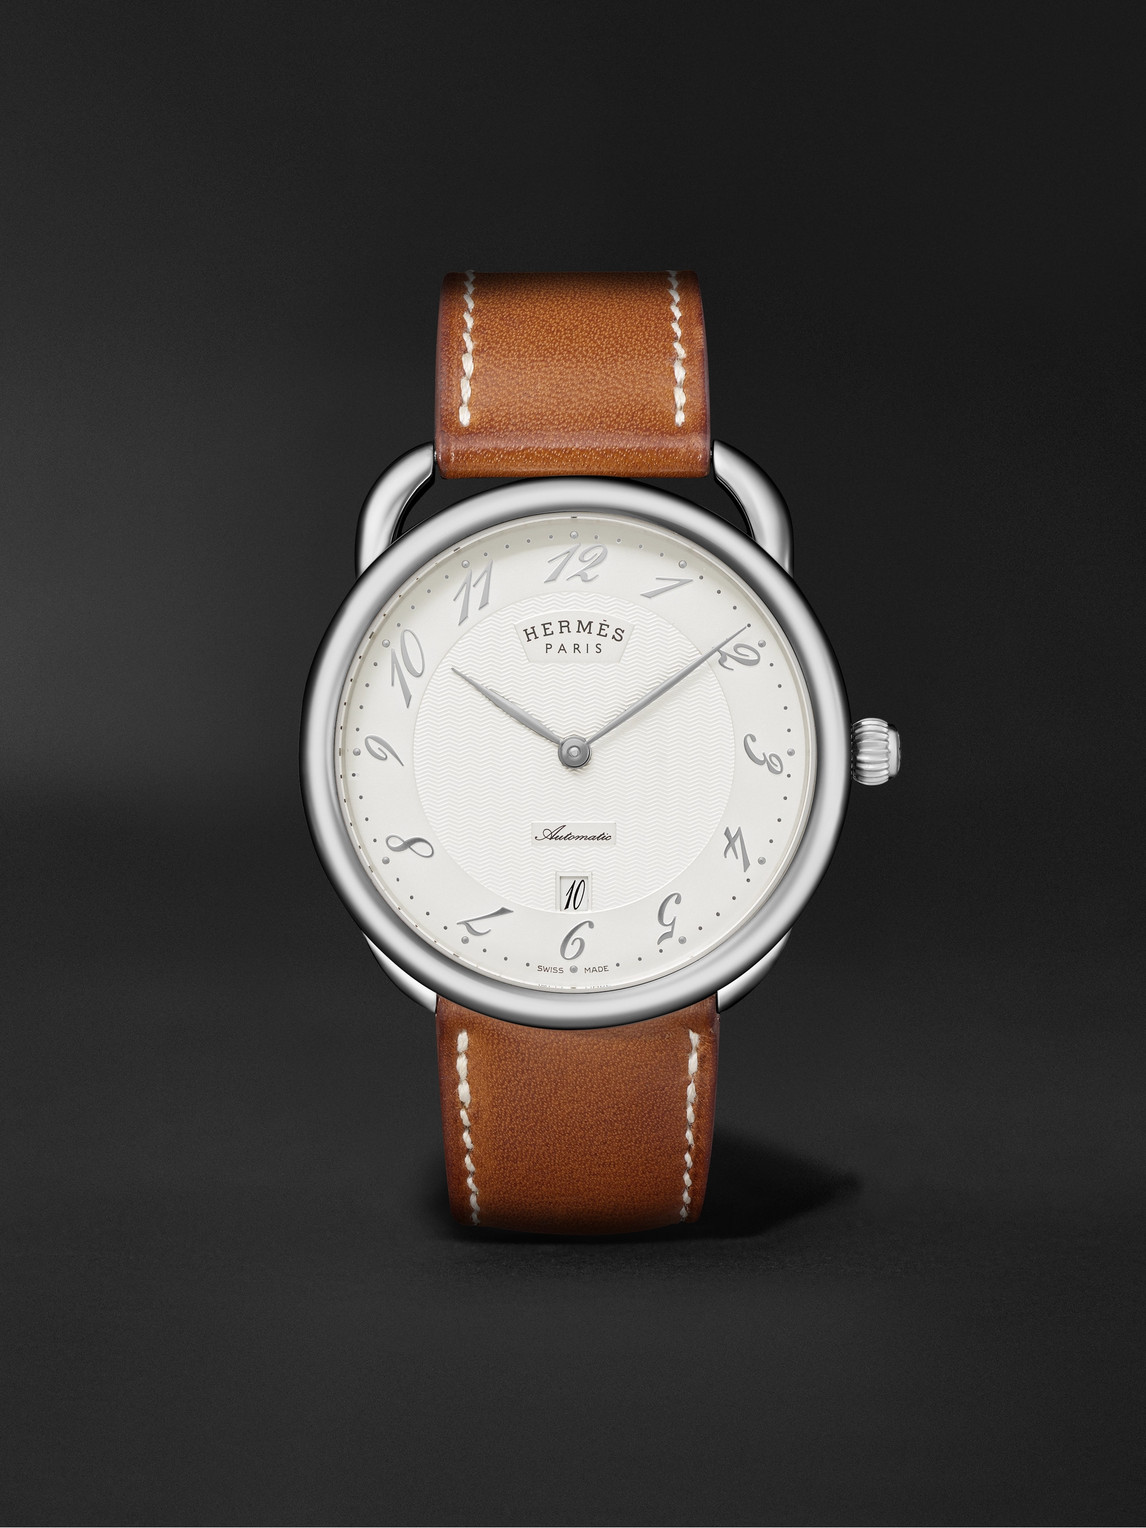 Hermès Timepieces Arceau Automatic 40mm Stainless Steel And Leather Watch, Ref. No. 055473ww00 In White